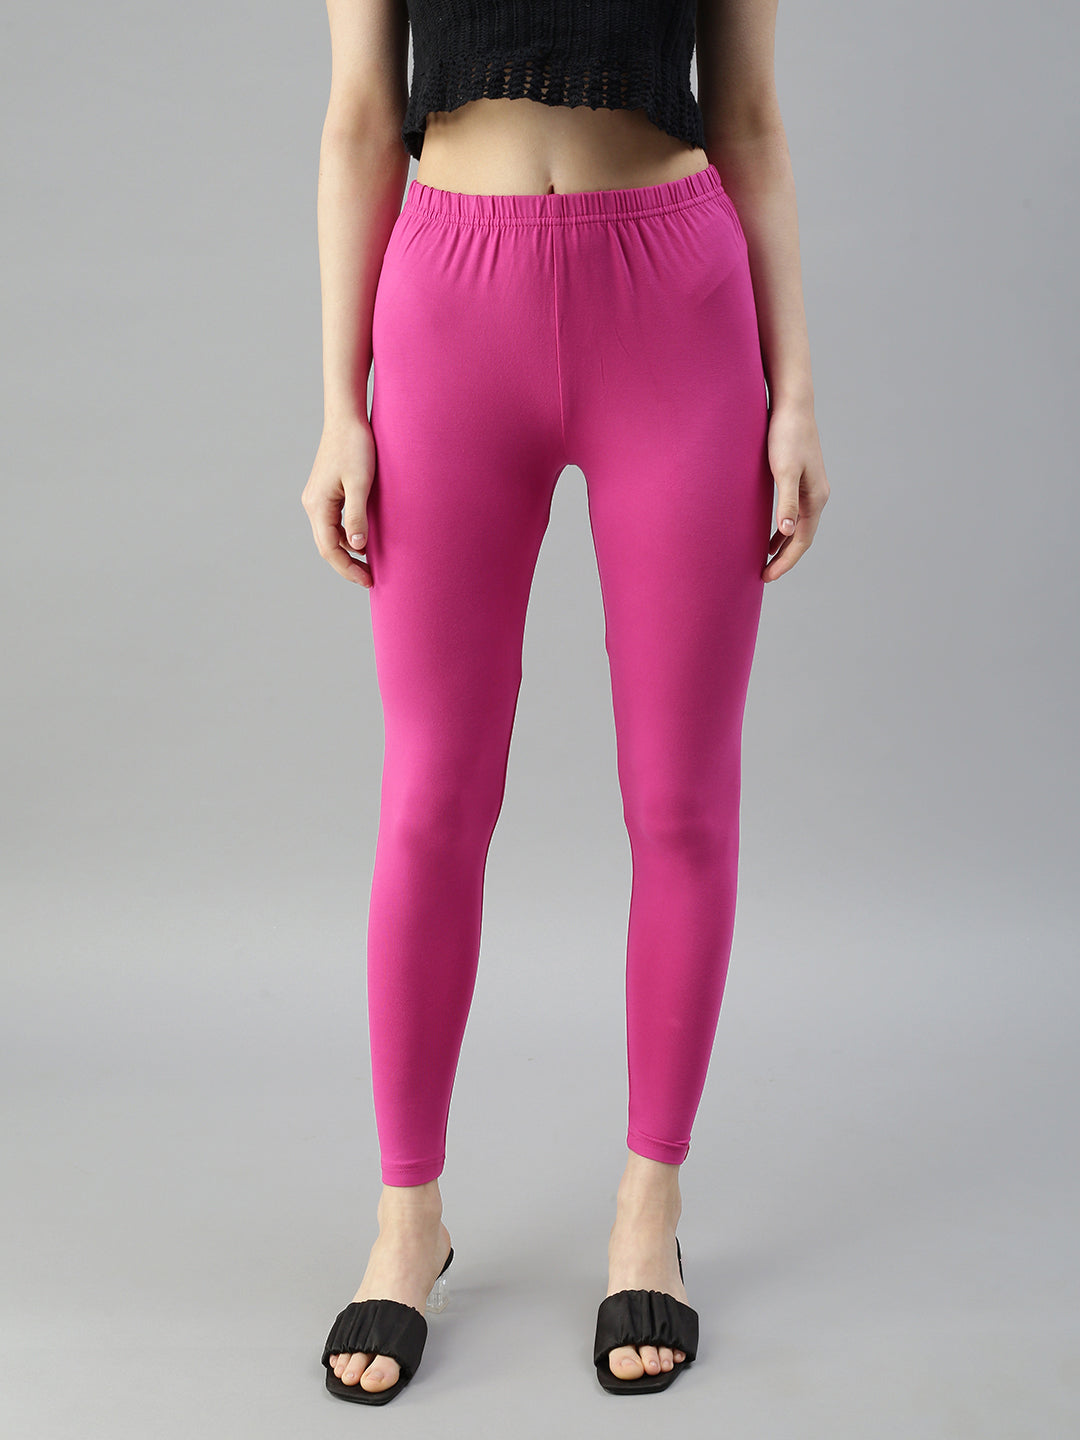 Pink 4 Way Ankle Length Ladies Leggings, Size: XL, Straight Fit at